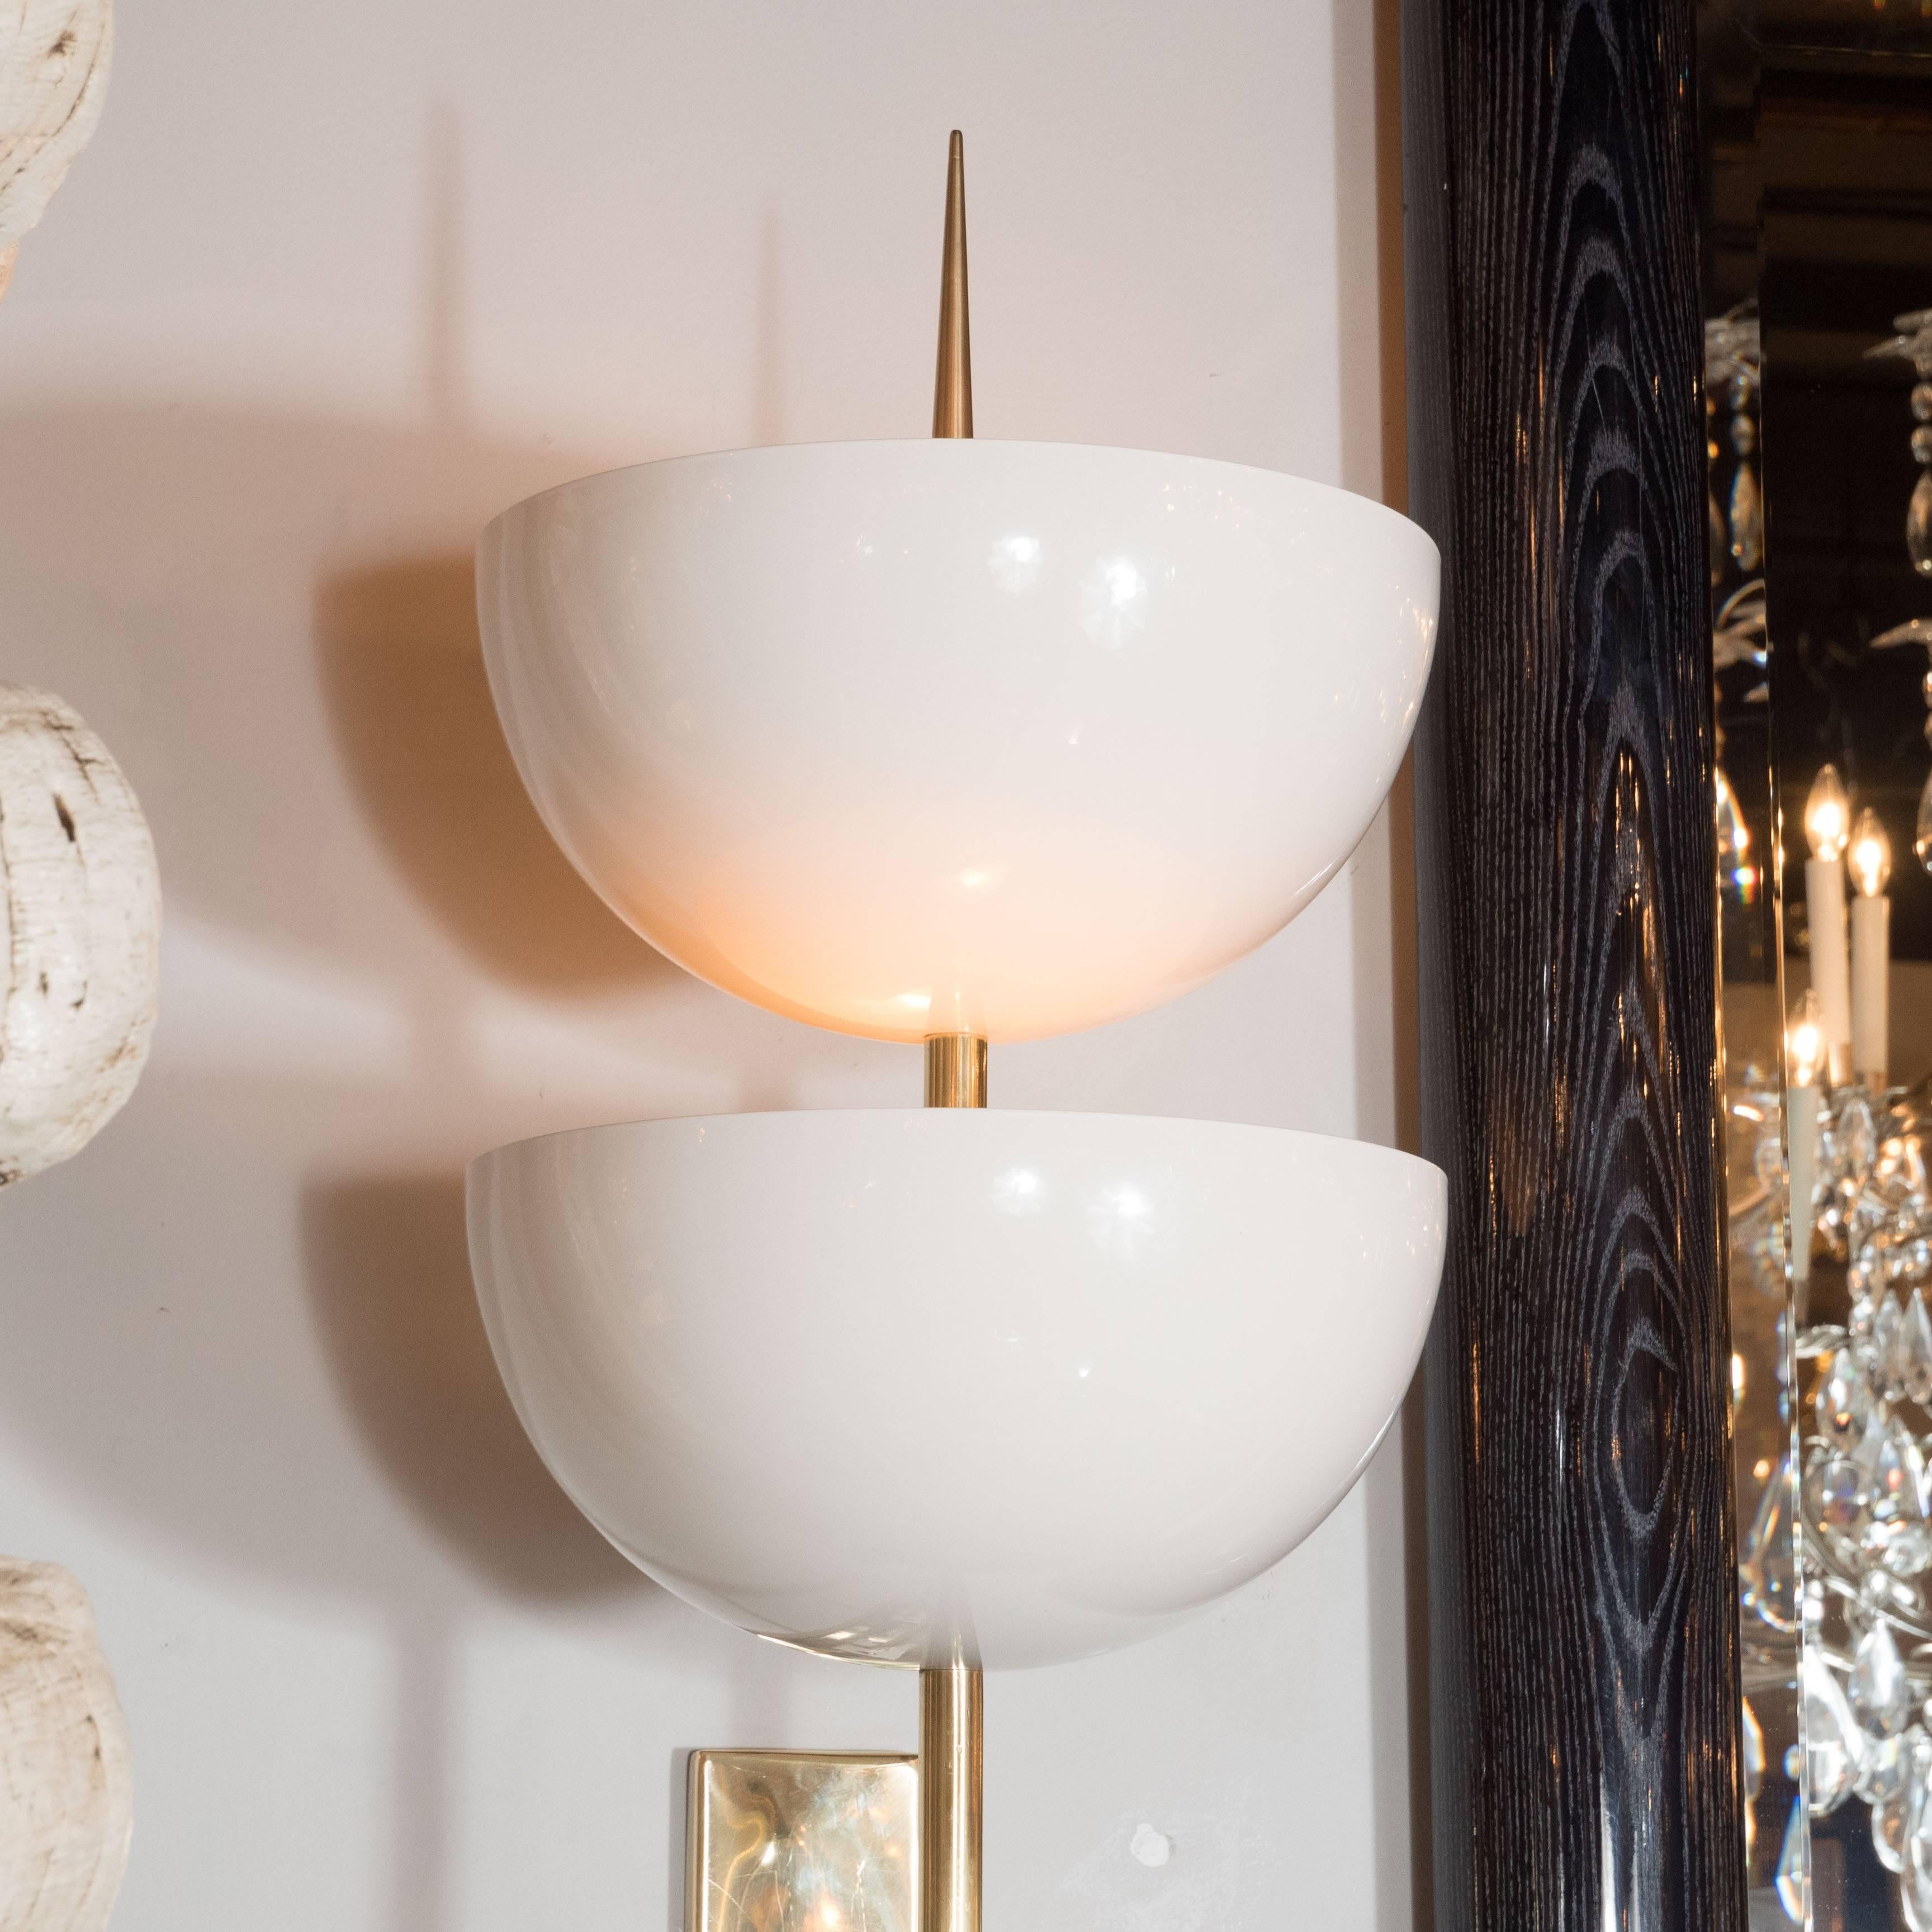 Italian Pair of Monumental Reverse-Dome Trophy Sconces in White Enamel and Brass